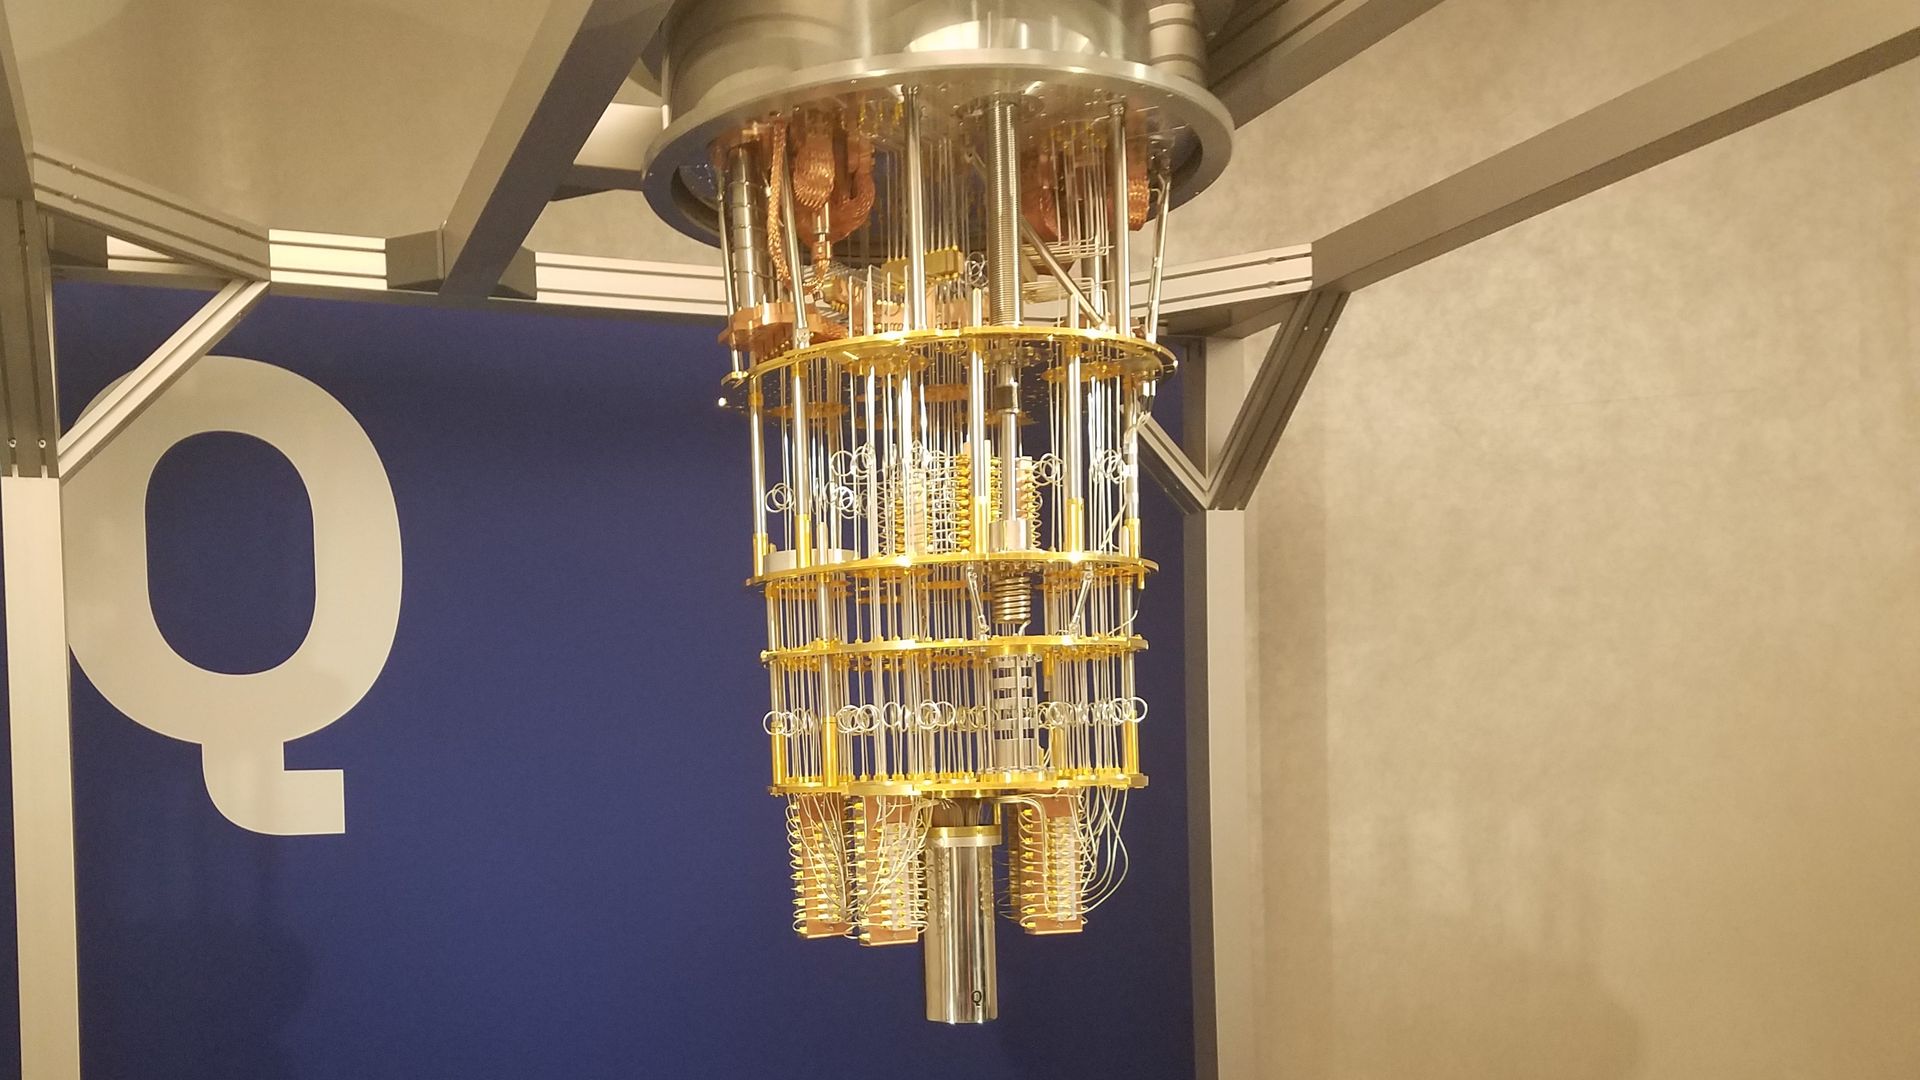 Quantum computer with cooling elements hanging from ceiling